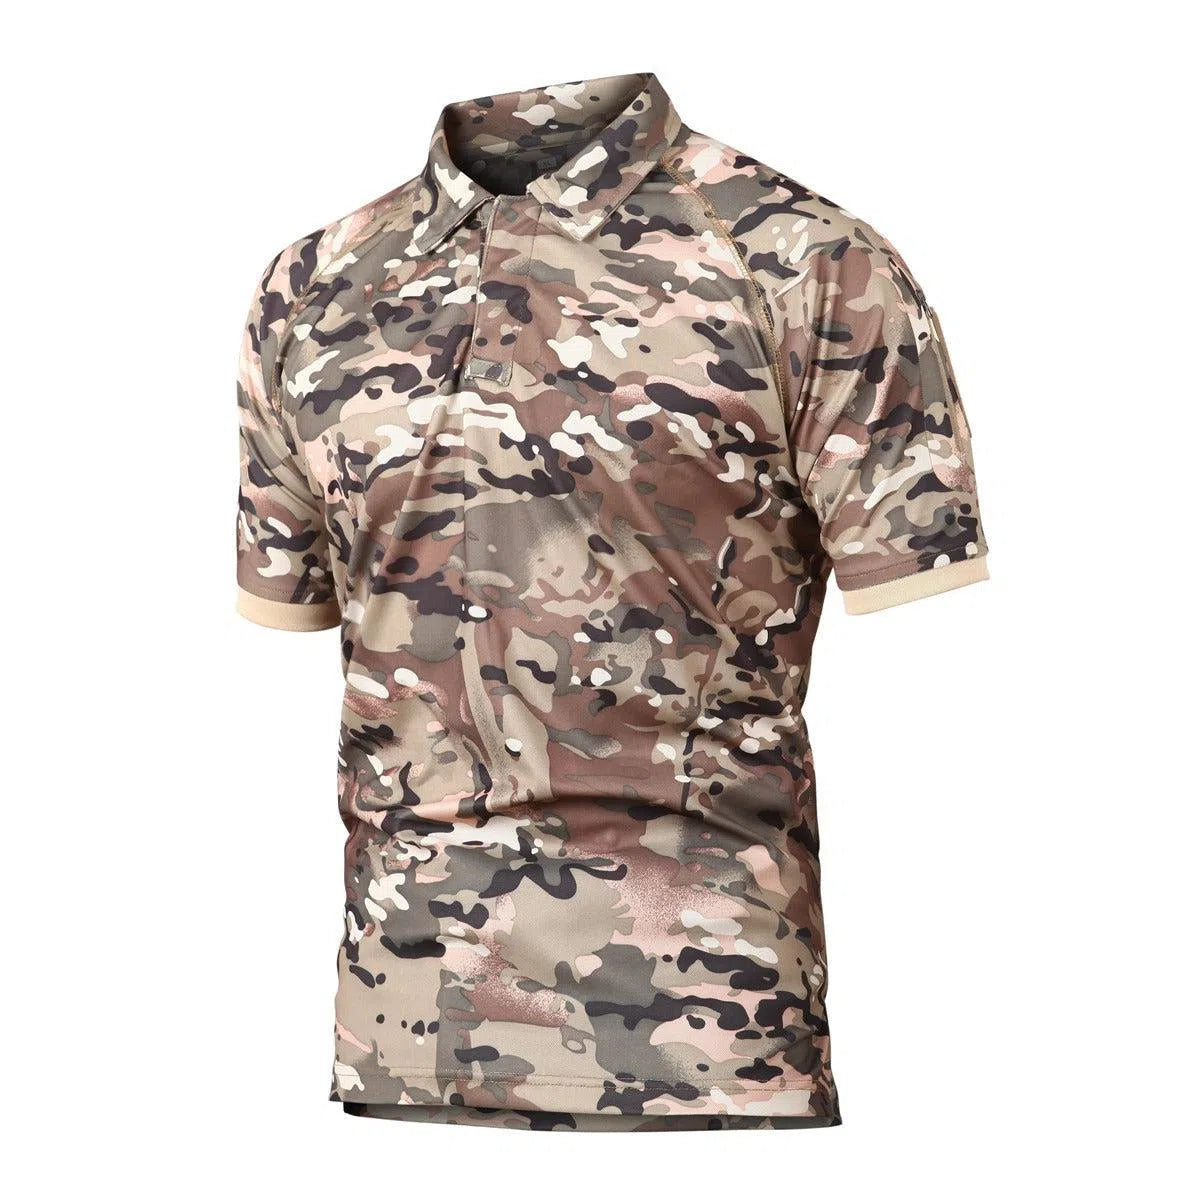 Tactical T-shirt Quick Dry Outdoor Breathable Sports Polo Shirt Lapel Short Sleeve Mountaineering on Foot Combat-Biu Blaster-Yellow- Biu Blaster